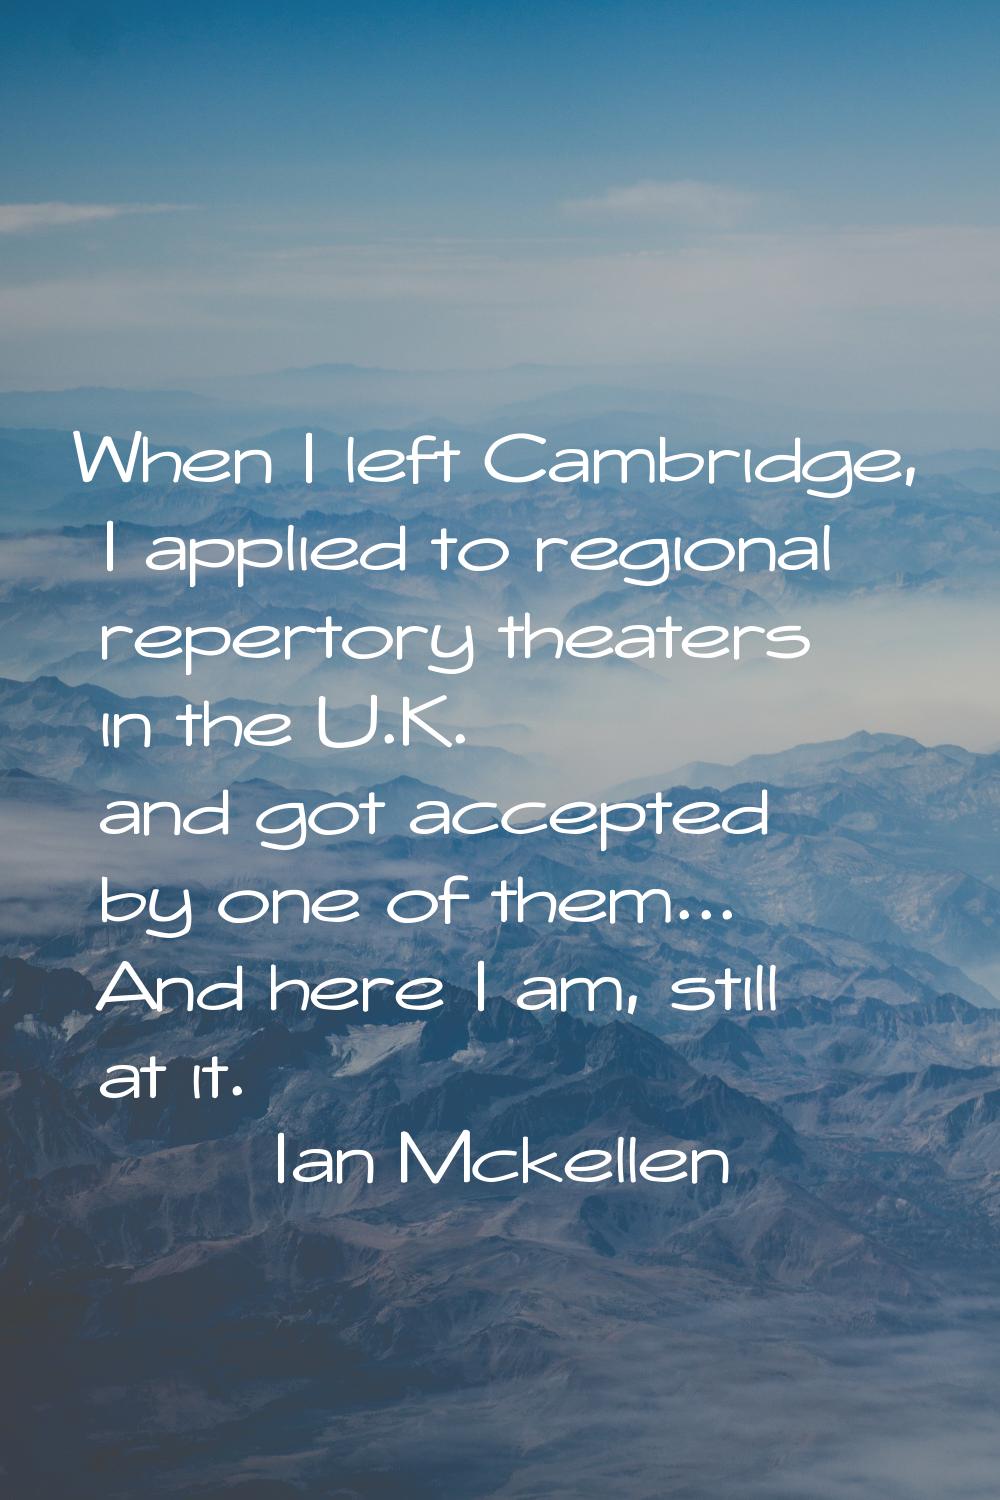 When I left Cambridge, I applied to regional repertory theaters in the U.K. and got accepted by one